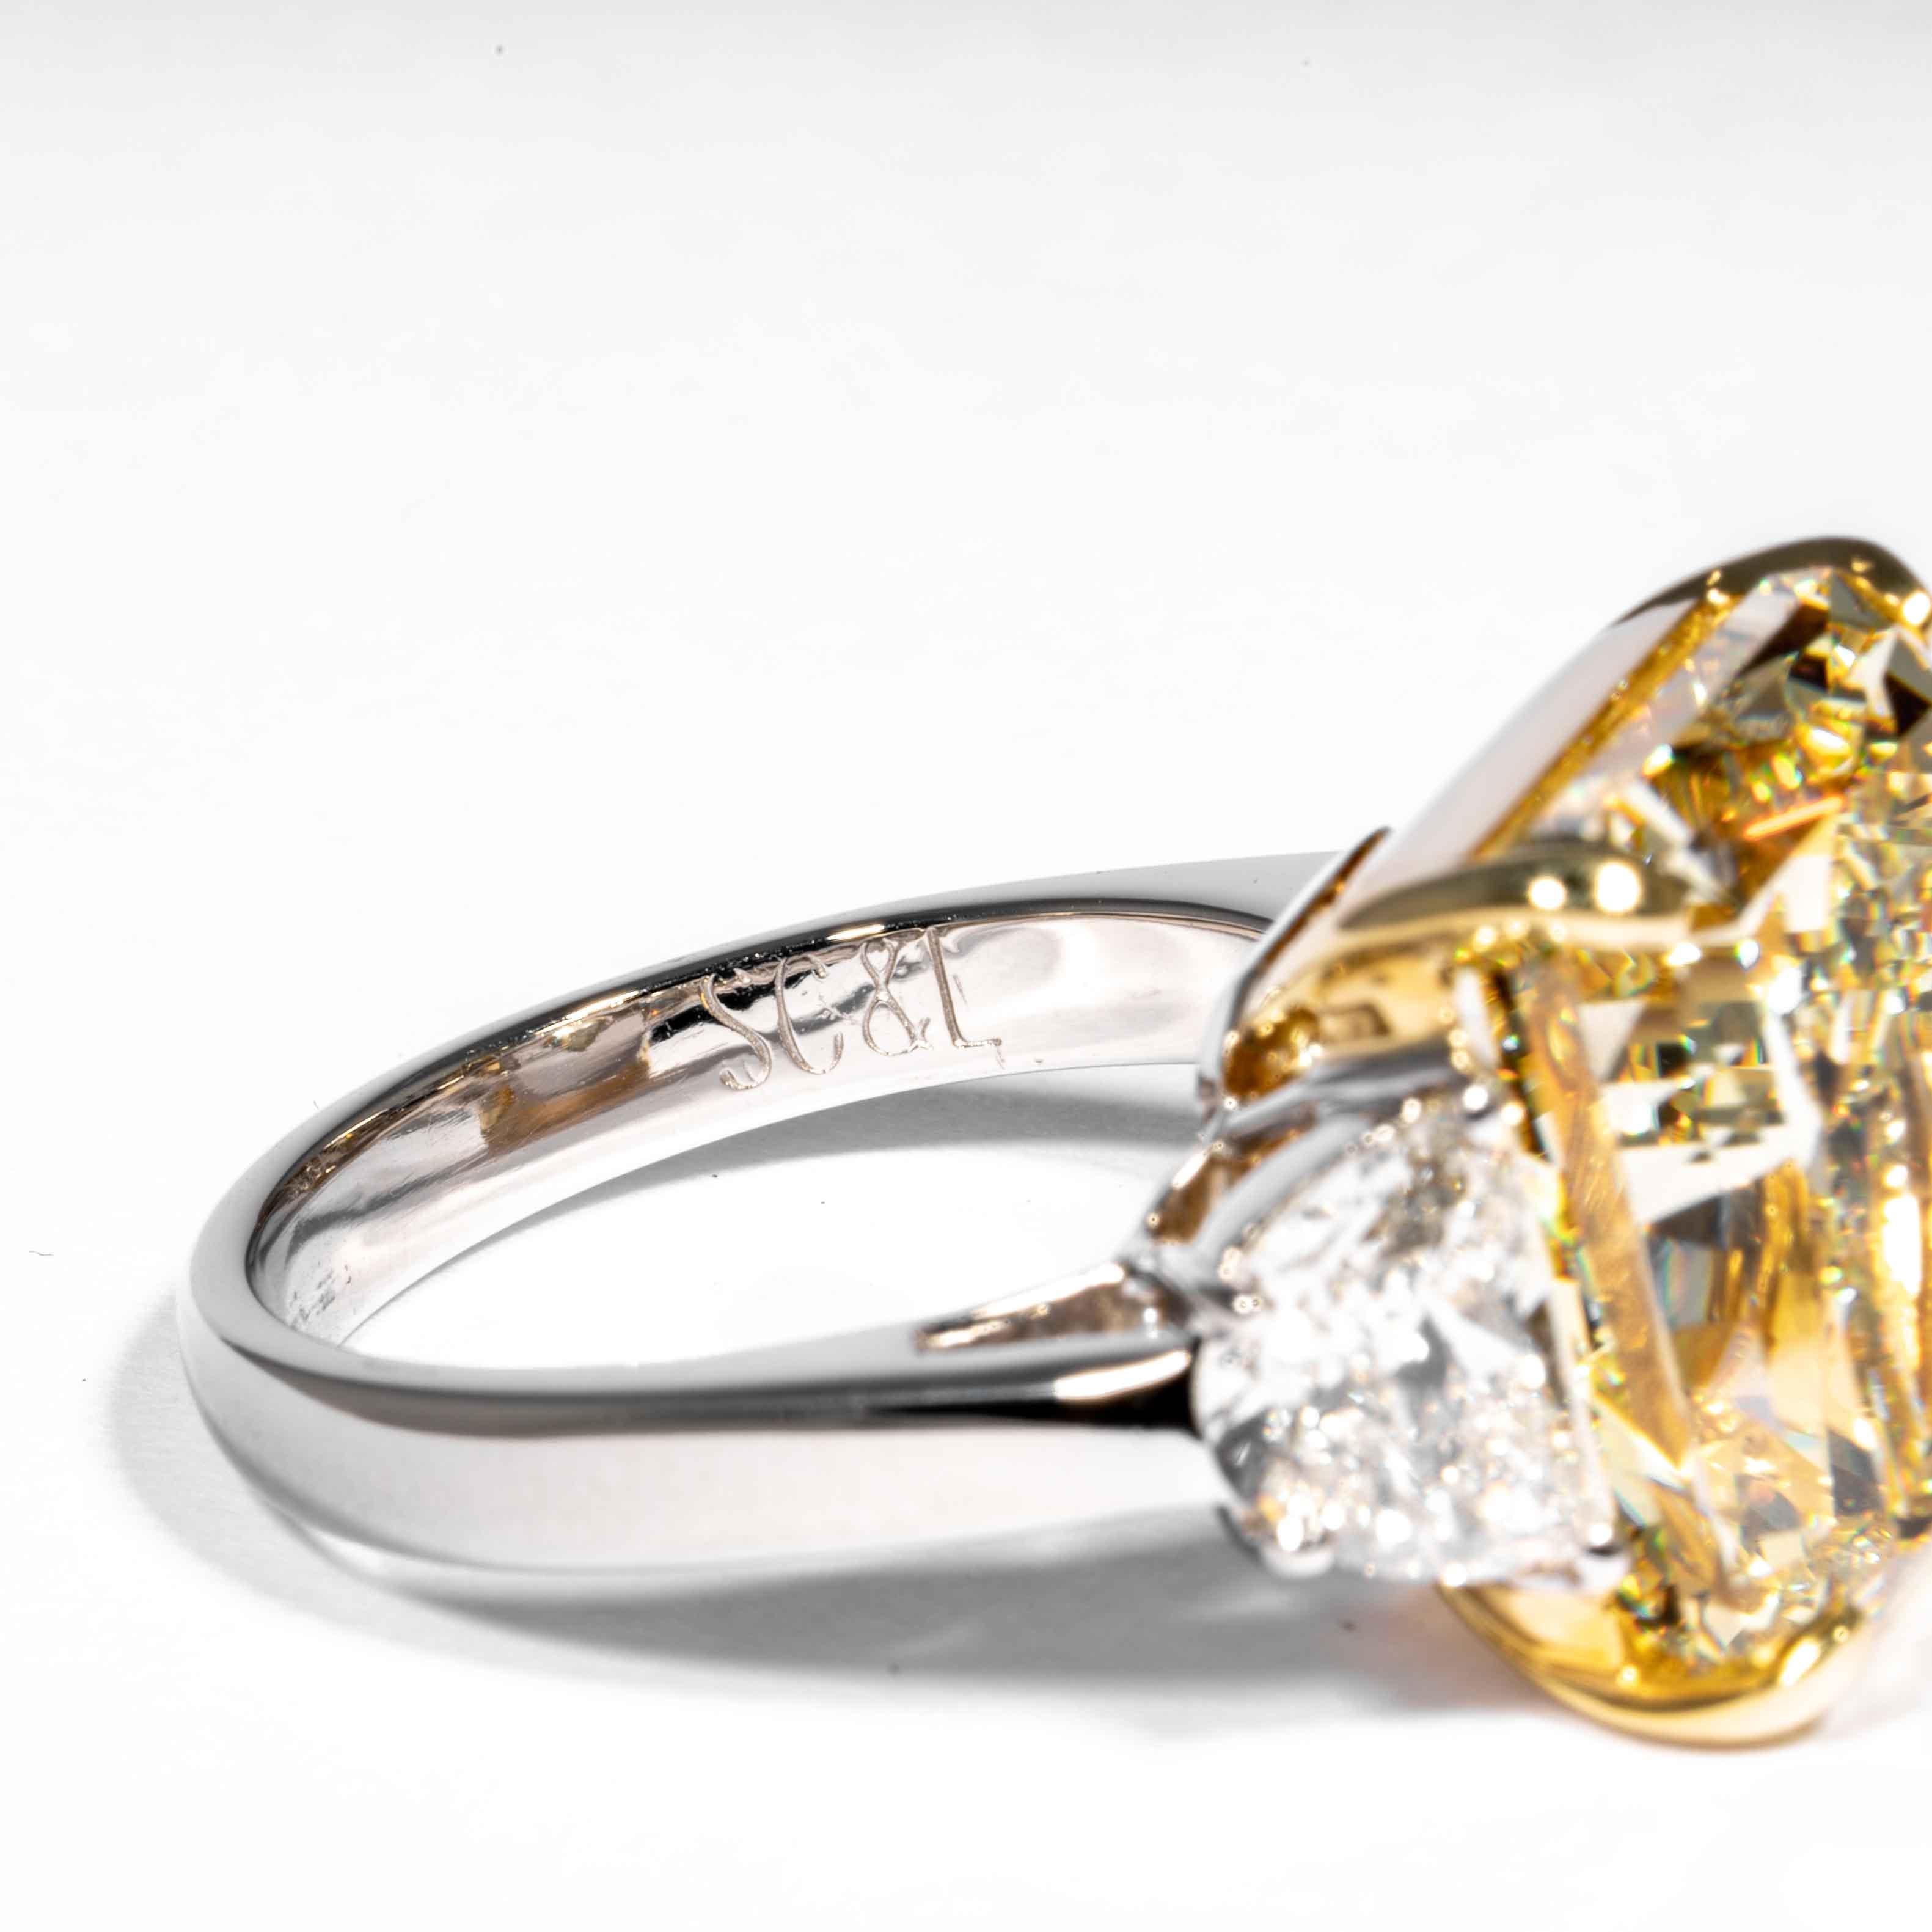 Shreve, Crump & Low GIA Certified 14.63 Carat Fancy Yellow Radiant Diamond Ring For Sale 1